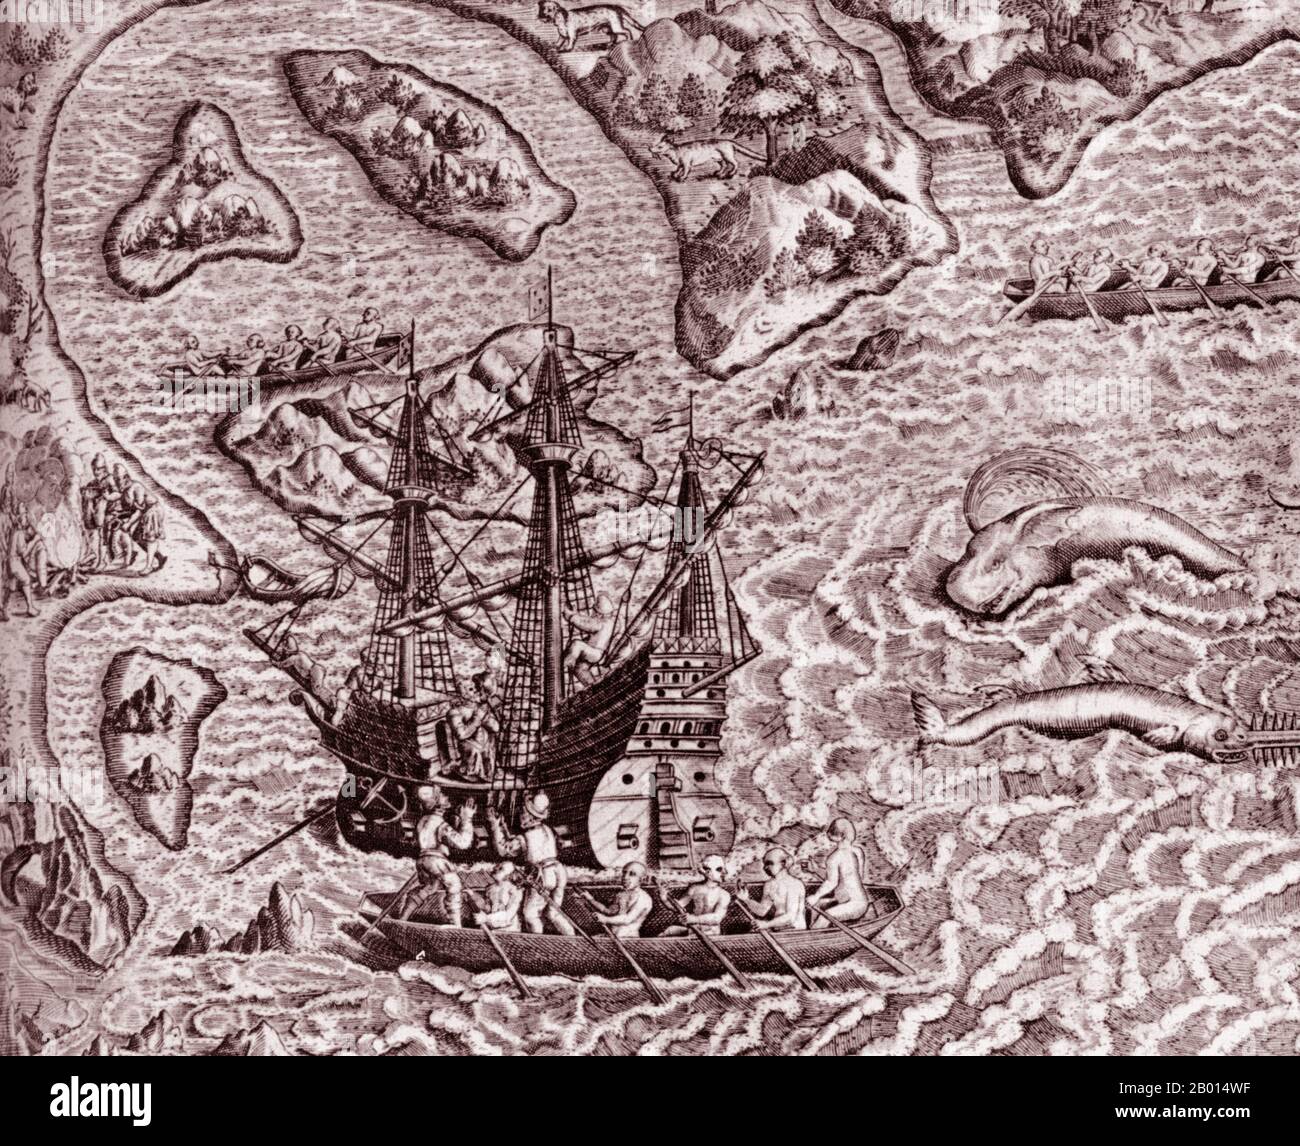 Brazil/Portugal: The arrival of Cabral's fleet in Porto Seguro on the coast of Brazil in April 1500. Engraving by Theodor de Bry (1528 - 27 March 1598), 16th century.  Following Portuguese navigator Vasco da Gama's success in discovering a sea route around Africa to India in 1498, King Manuel I commissioned Pedro Alvares Cabral to lead a second voyage of 13 ships and 1,500 men to India. Although he intended to stay close to the west coast of Africa, Cabral sailed far off course and accidentally chanced upon the coast of South America. Stock Photo